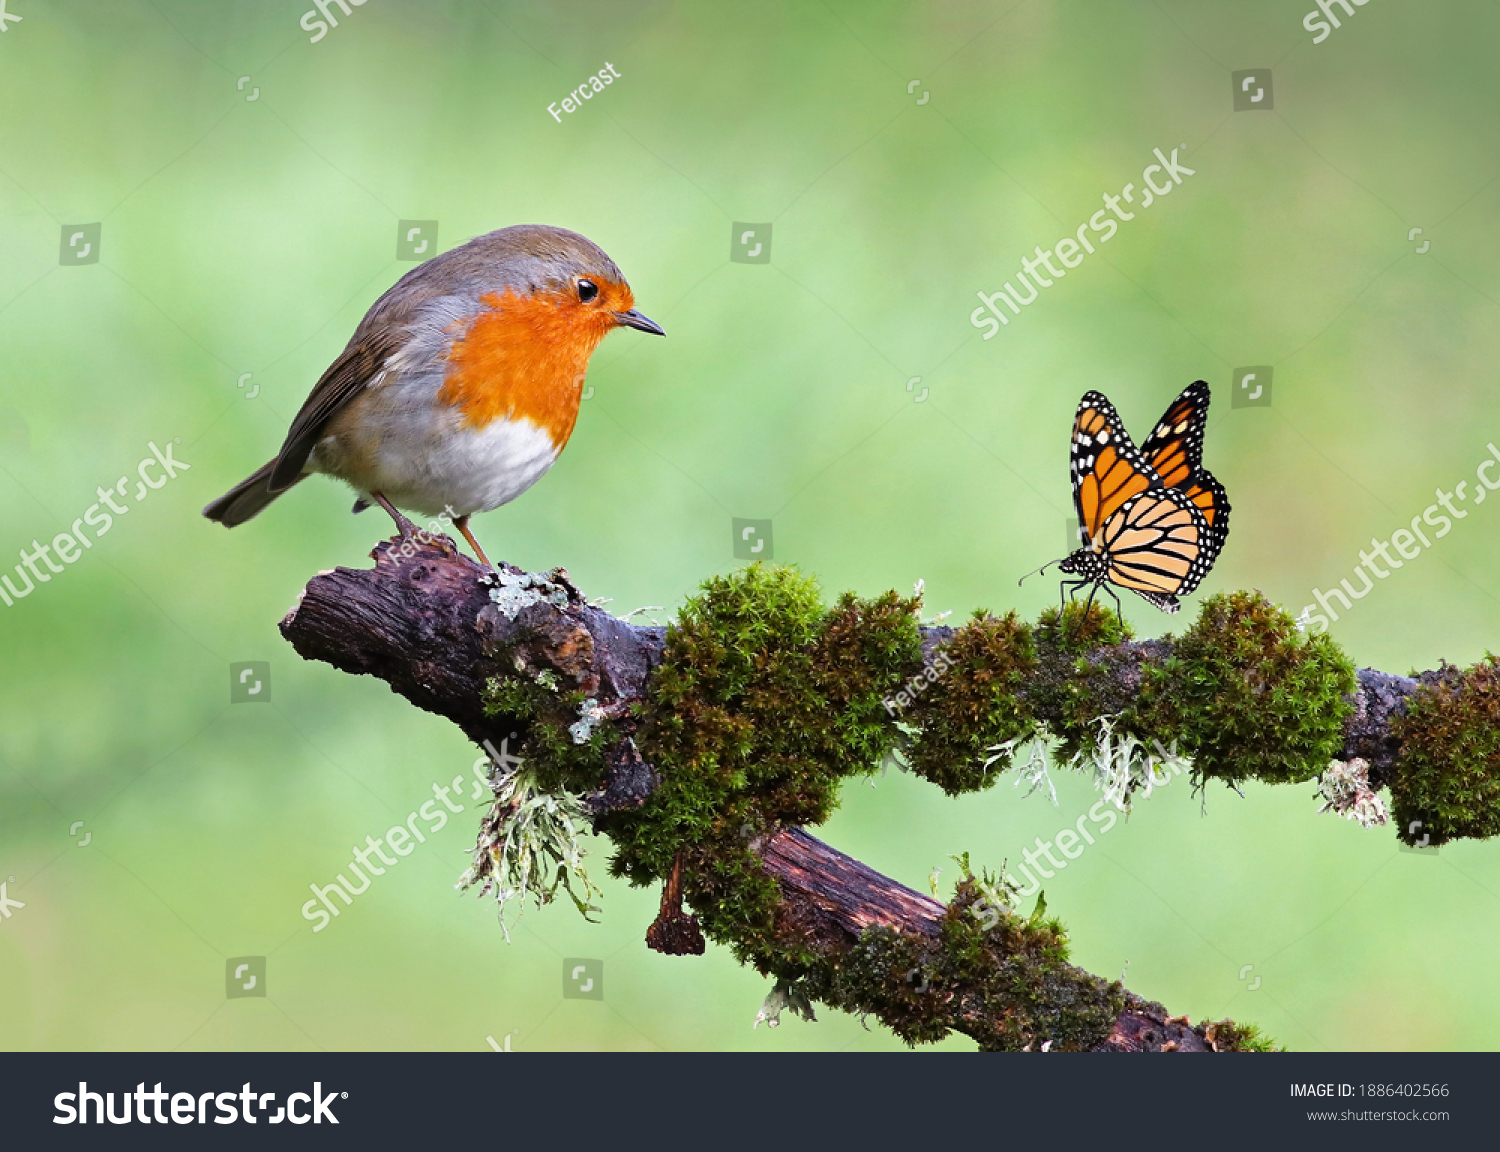 Beautiful background image of a wild robin (Erithacus rubecula) with stunning colors and a monarch butterfly (Danaus plexippus) standing on a branch. Tiny and cute bird looking at a prey butterfly.  #1886402566